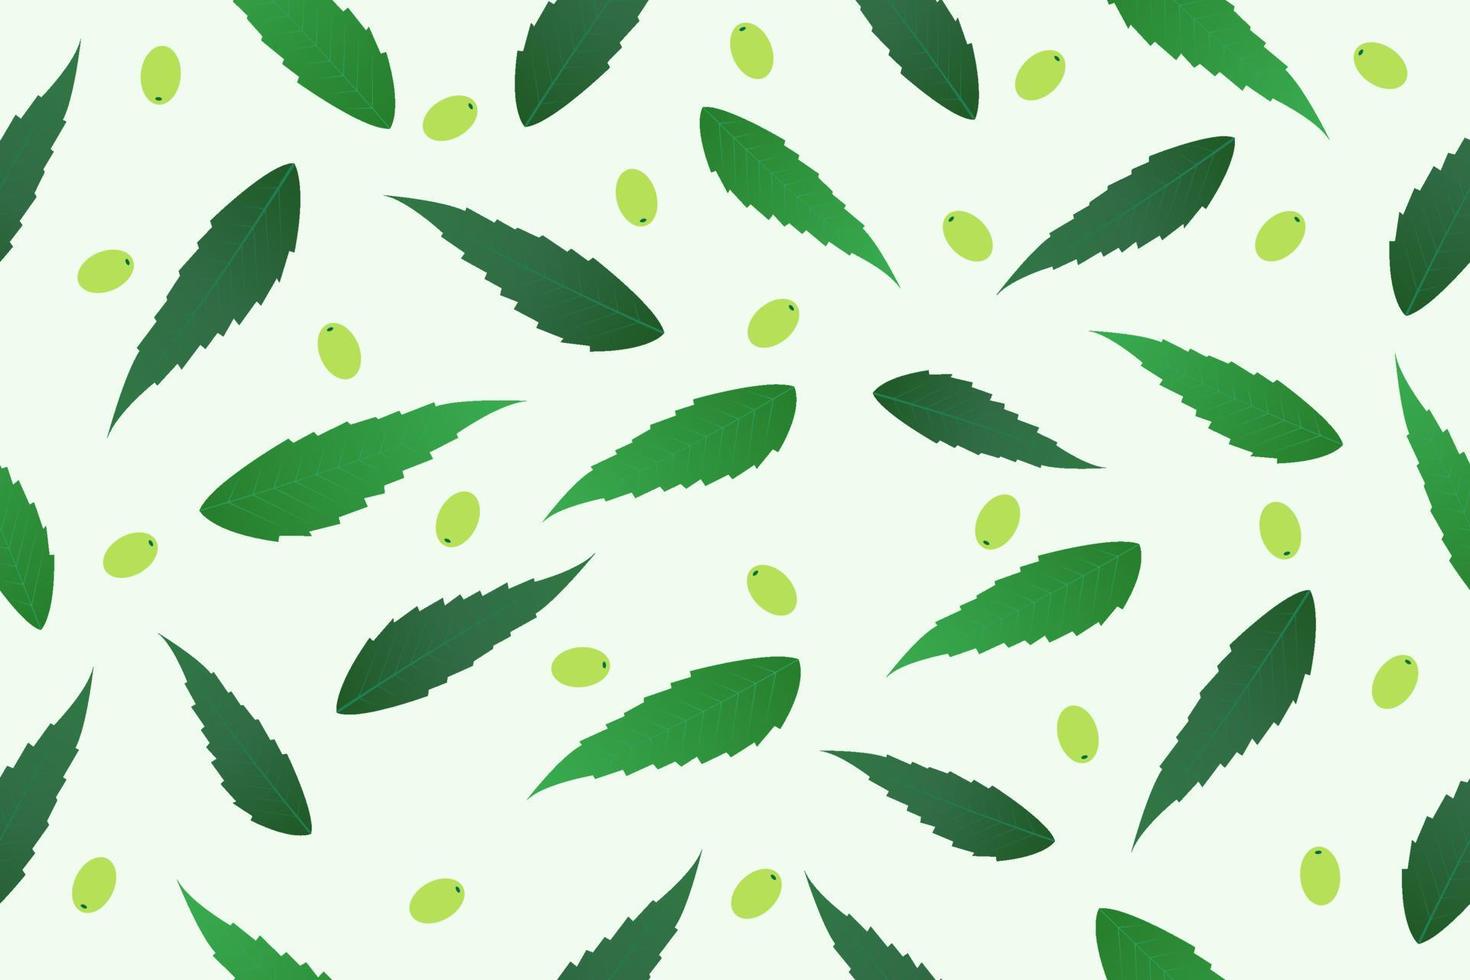 Neem leaves and fruit seamless background vector